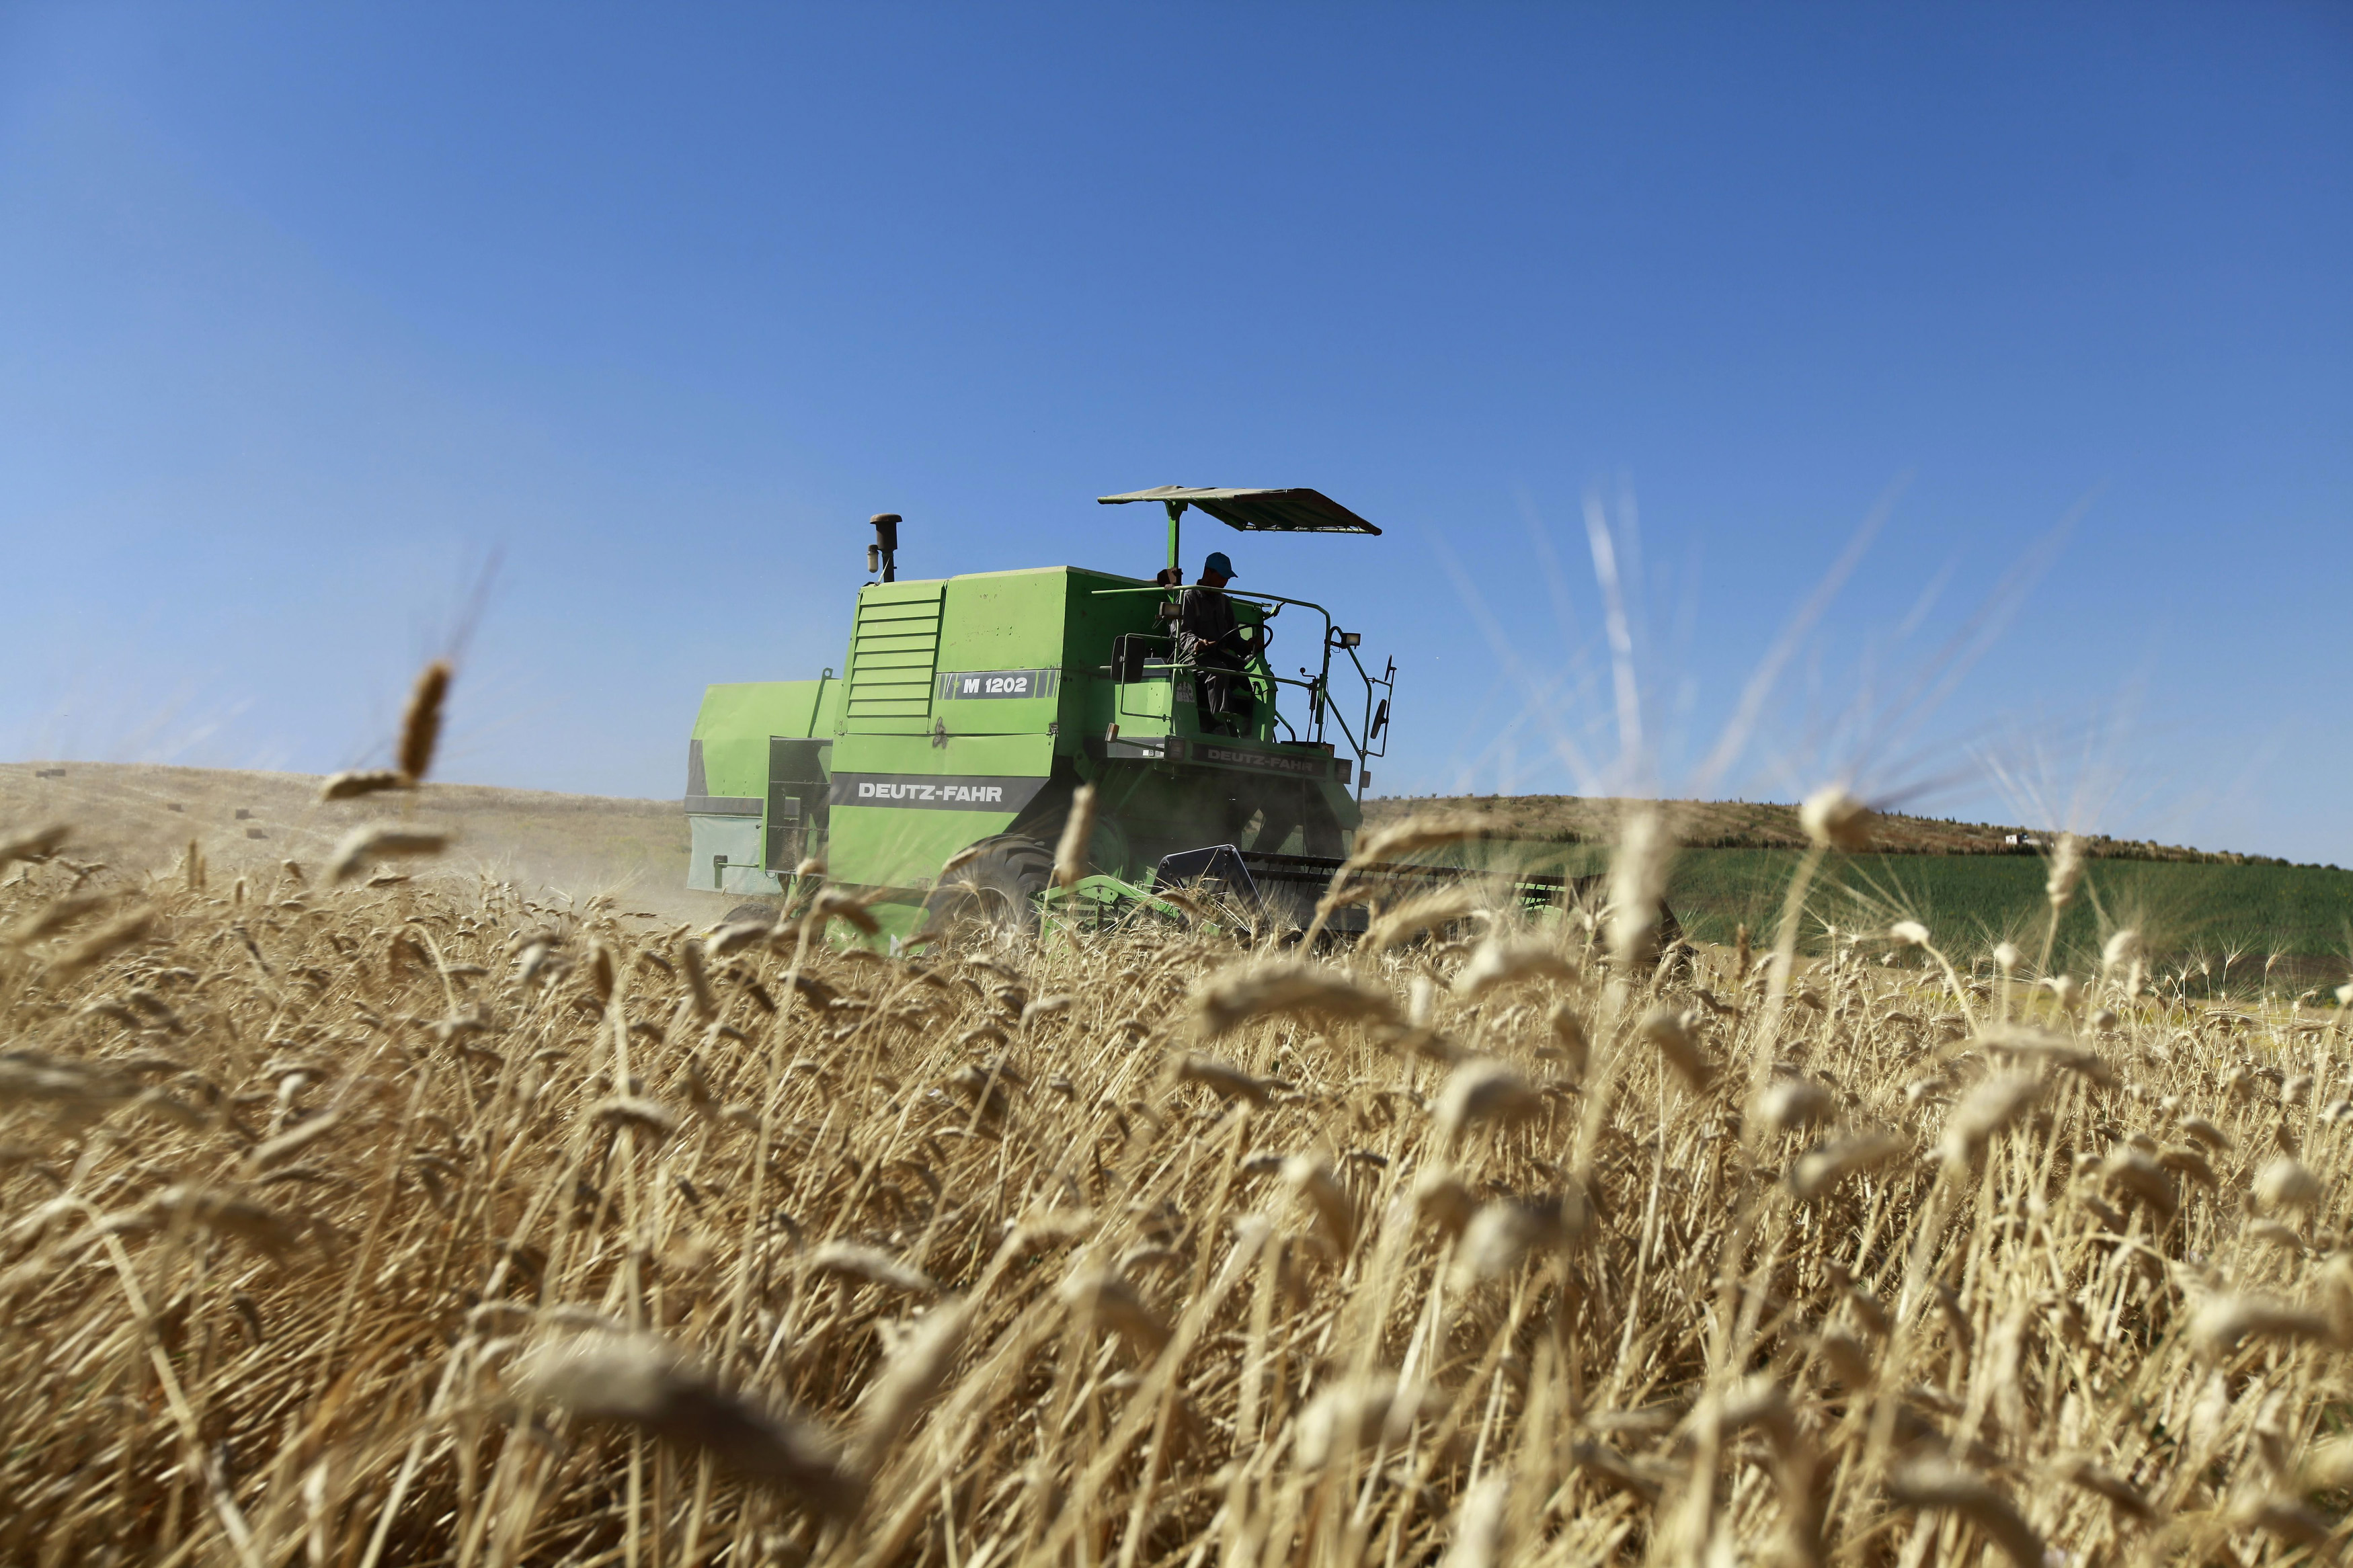 Africa could be hit hard by loss of Ukrainian grain exports, institute says  | Reuters